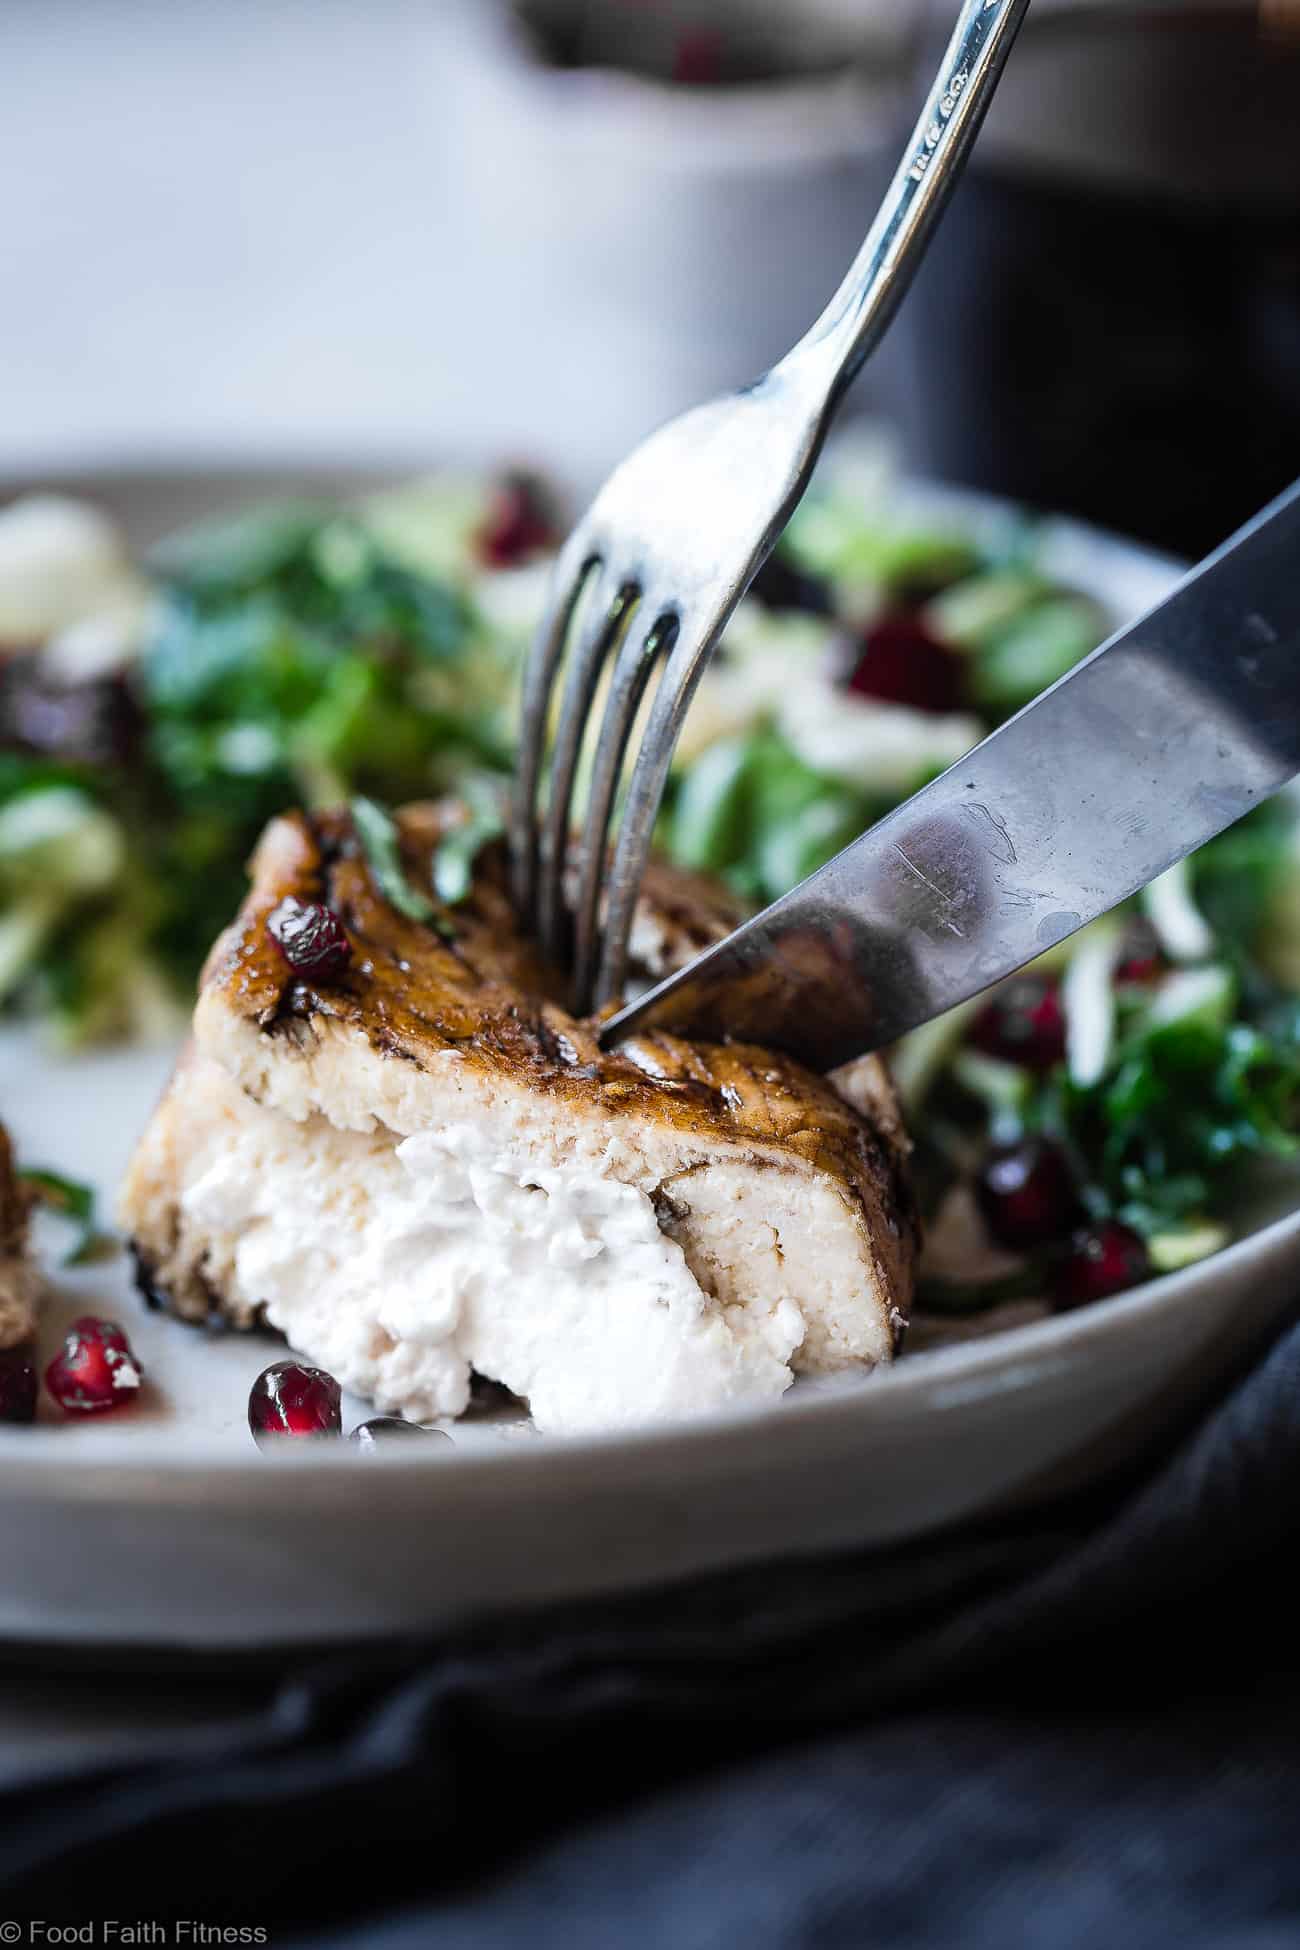 Balsamic Pomegranate Goat Cheese Stuffed Chicken - A  healthy and gluten free dinner, loaded with superfoods! Both picky husbands and kids love this dinner and it feels like a fancy restaurant but is quick and easy enough for weeknights! | Foodfaithfitness.com | @FoodFaithFit